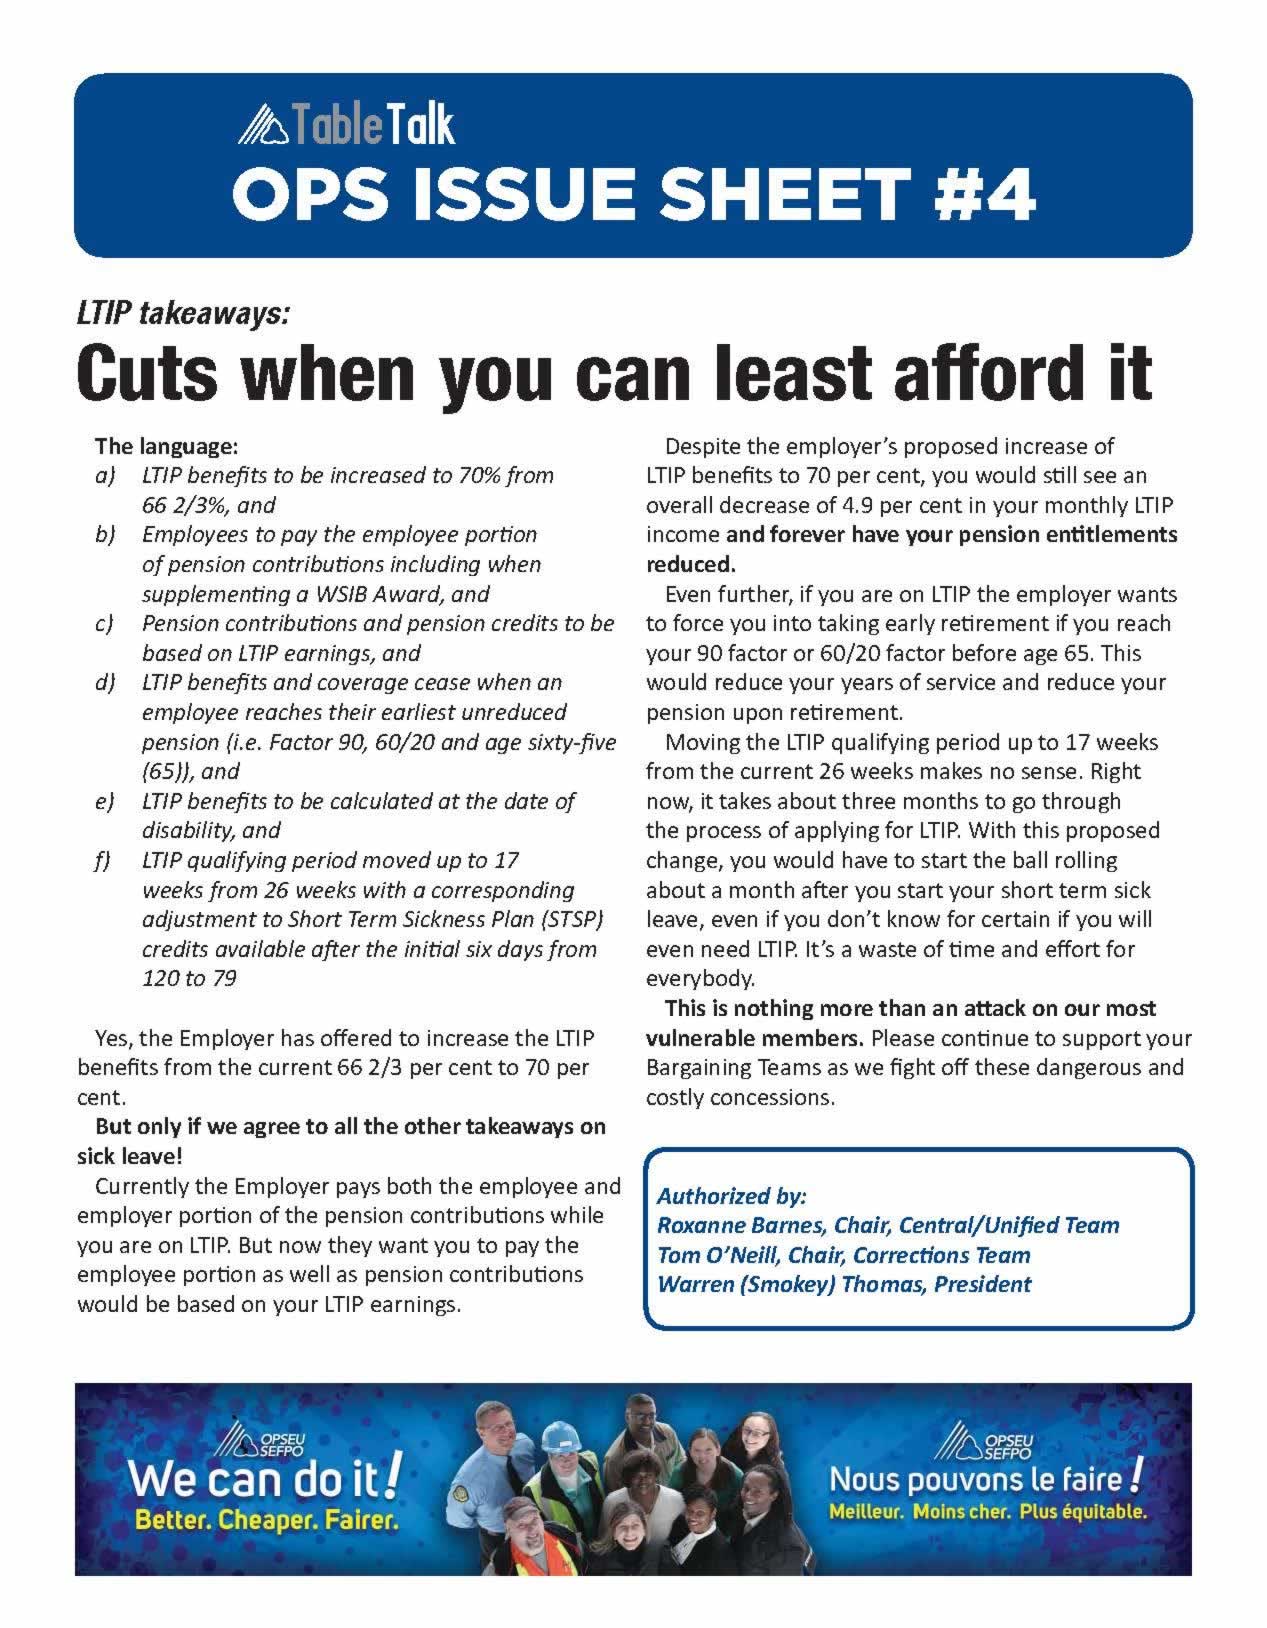 OPS Issue Sheet. LTIP takeaways: Cuts when you can least afford it